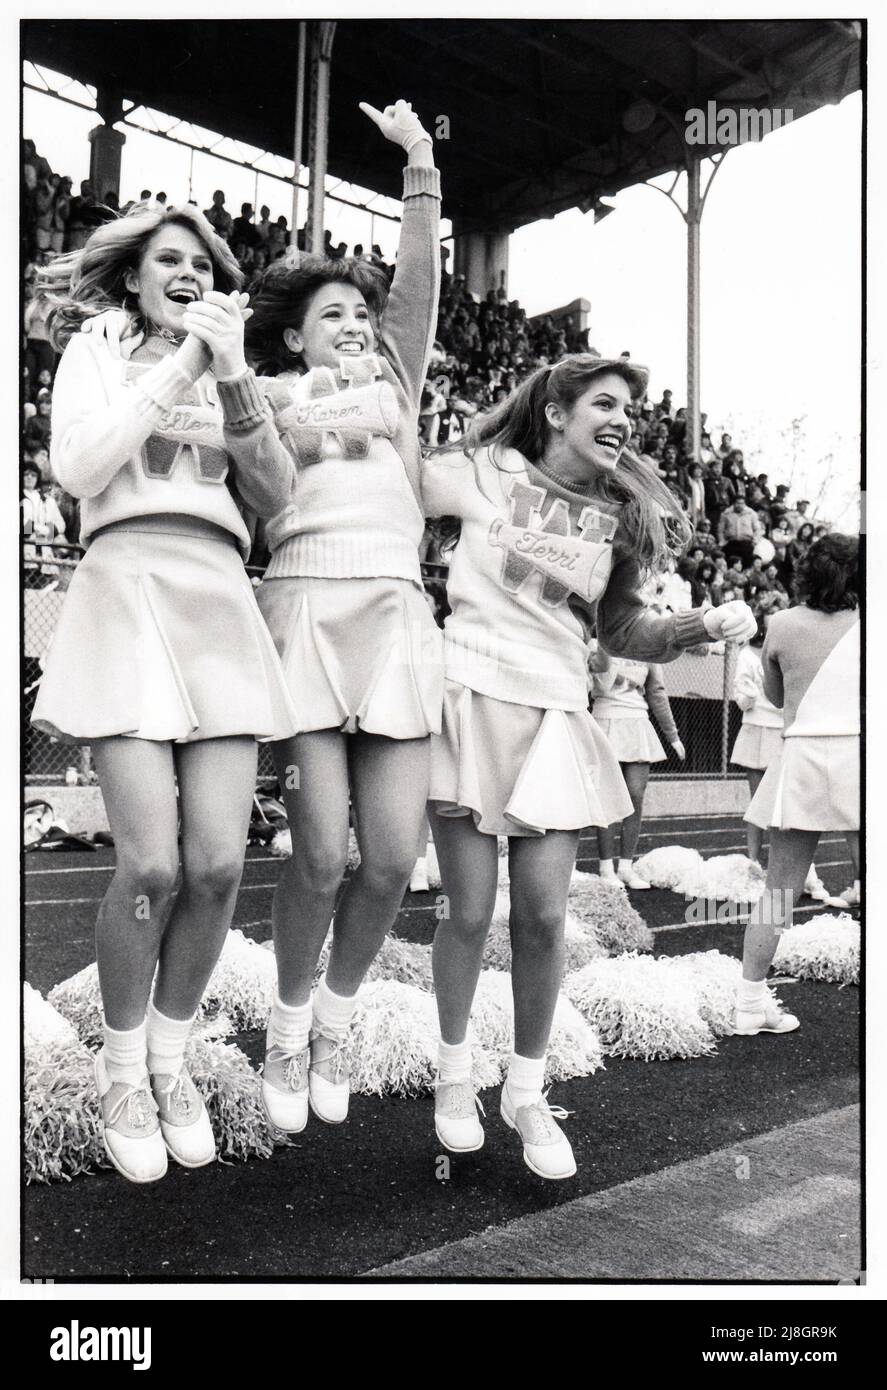 High School cheerleaders react to a touchdown in a game against Midwood High at Midwood Field in Brooklyn, New York circa 1980. Stock Photo